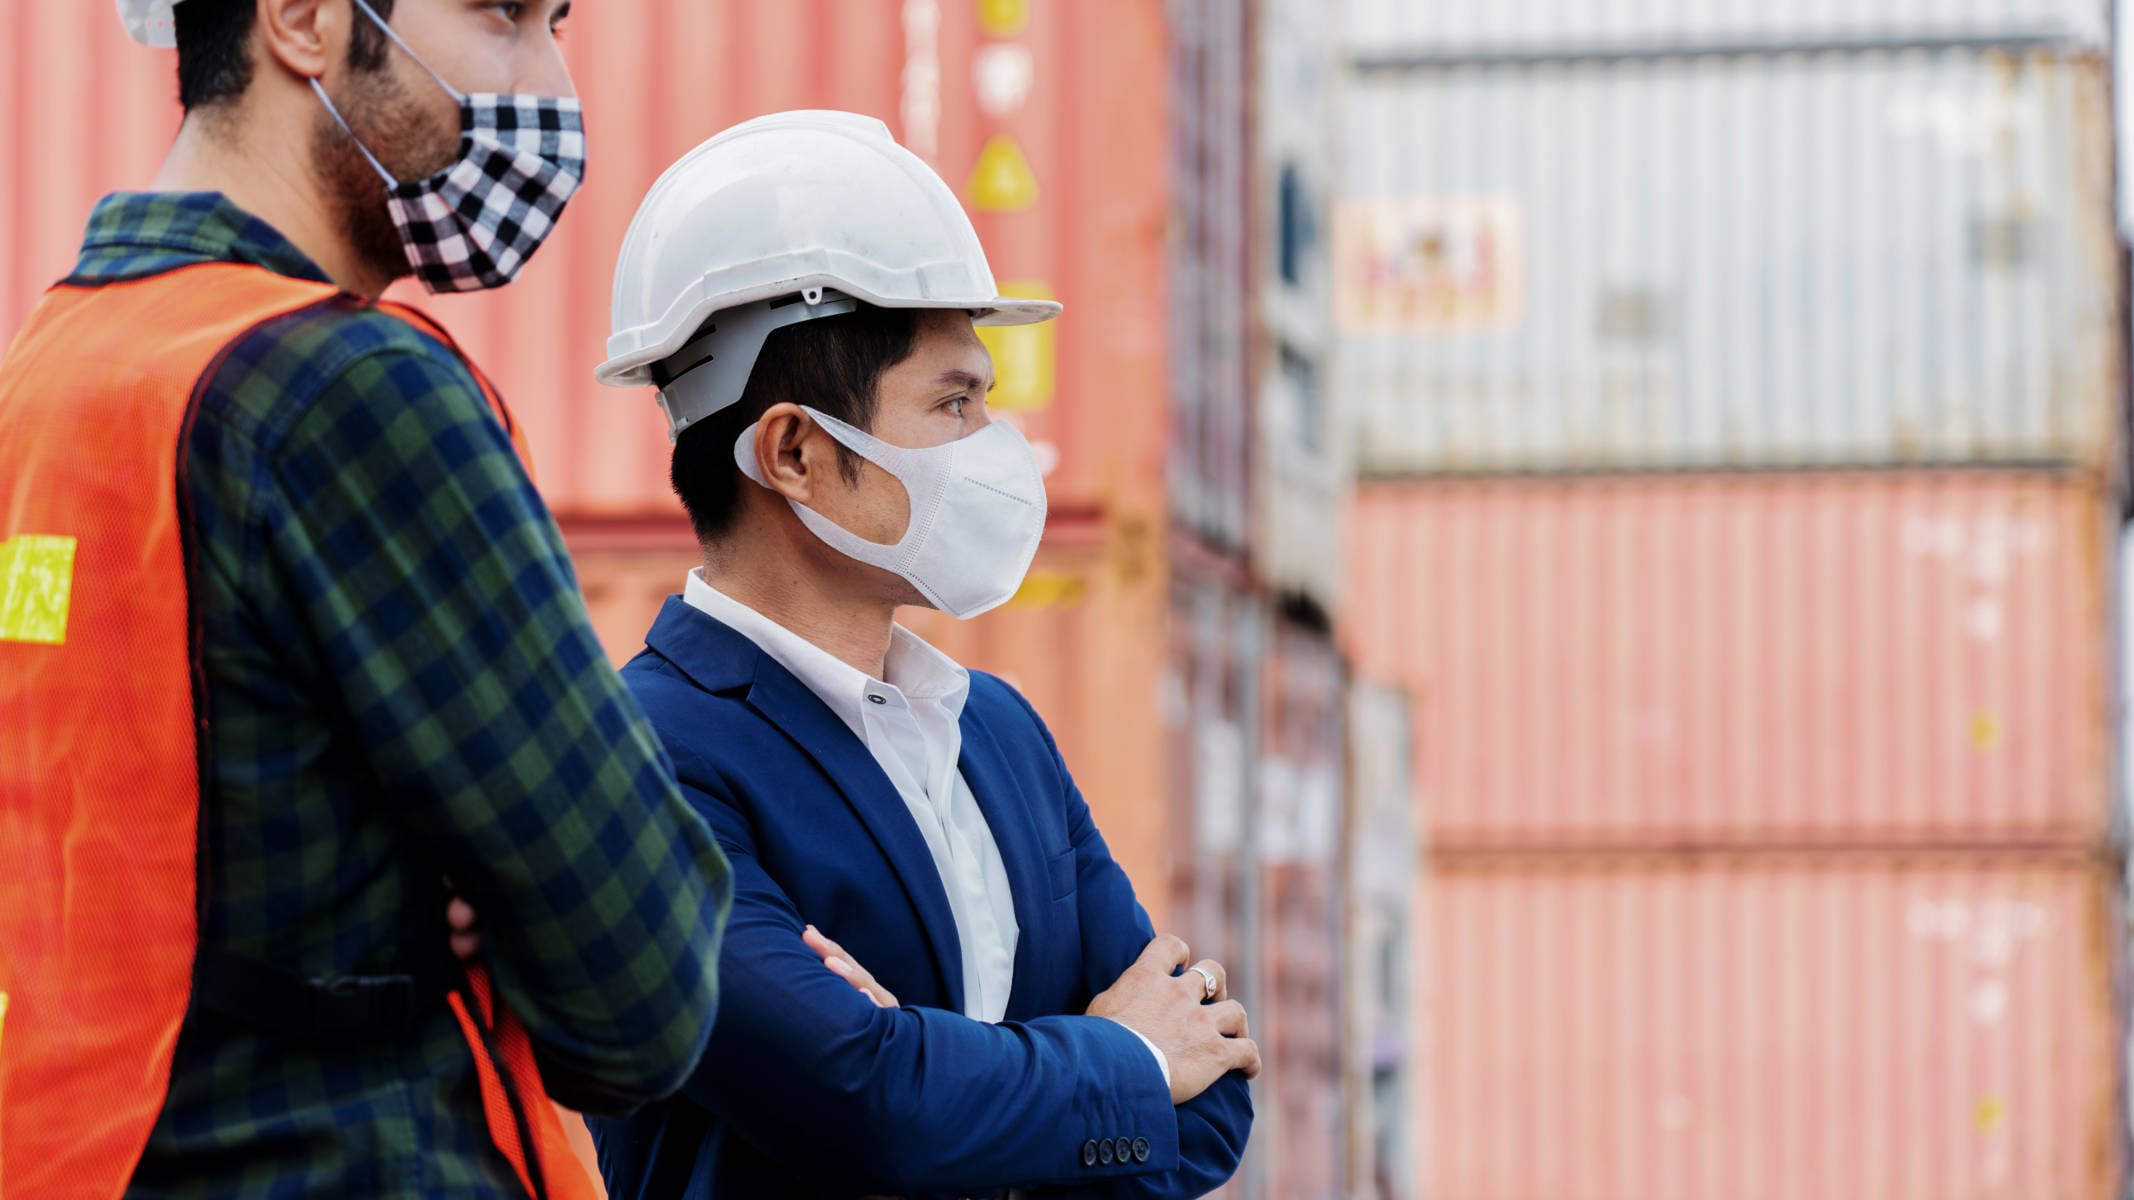 Construction workers or engineer wear safety helmet And the mask in the factory Or container. Prevent accidents at work or dust, secretion spread Coronavirus. Social distancing. Concept New Normal